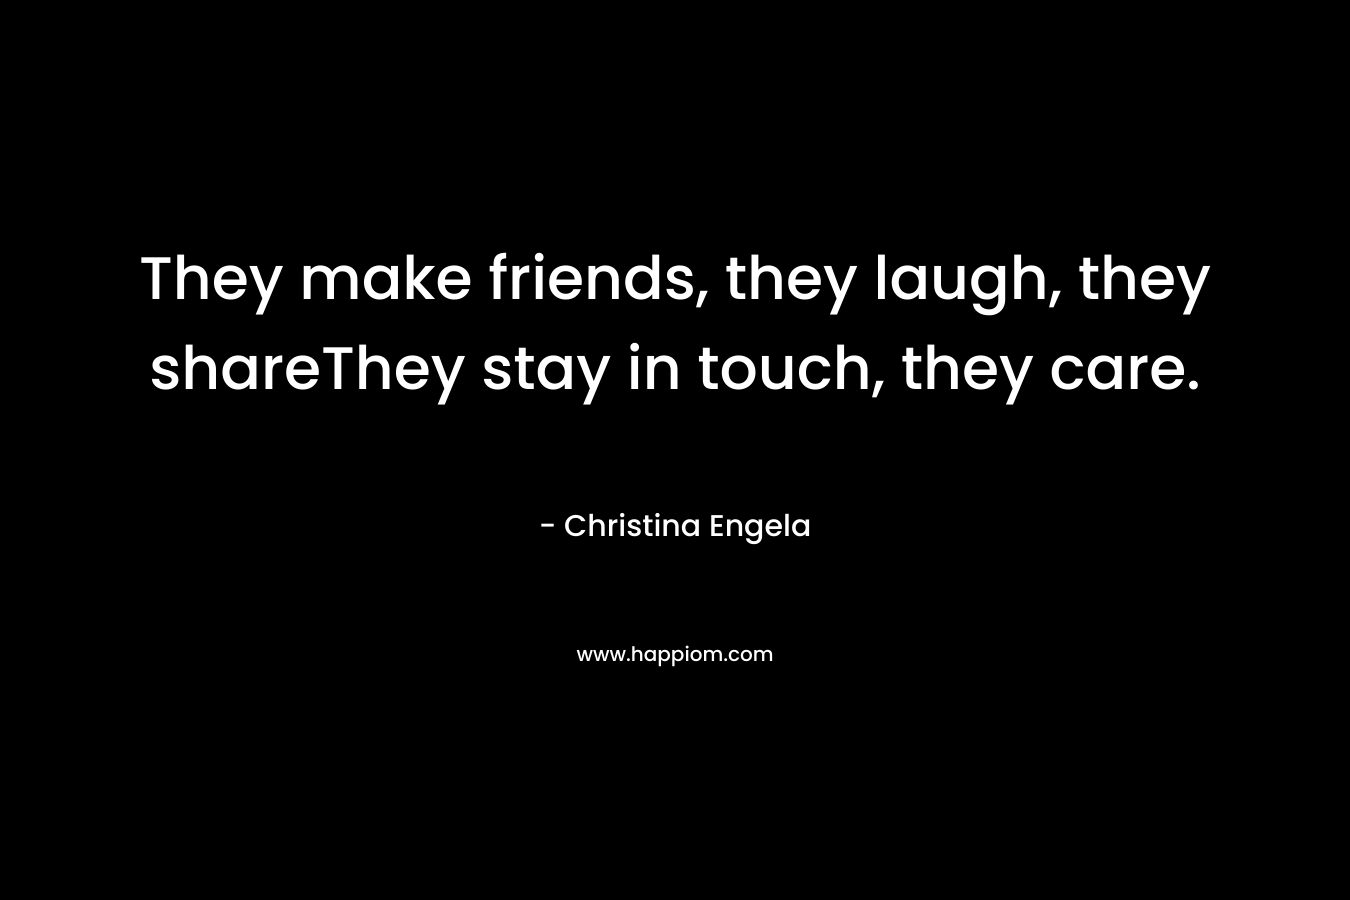 They make friends, they laugh, they shareThey stay in touch, they care.